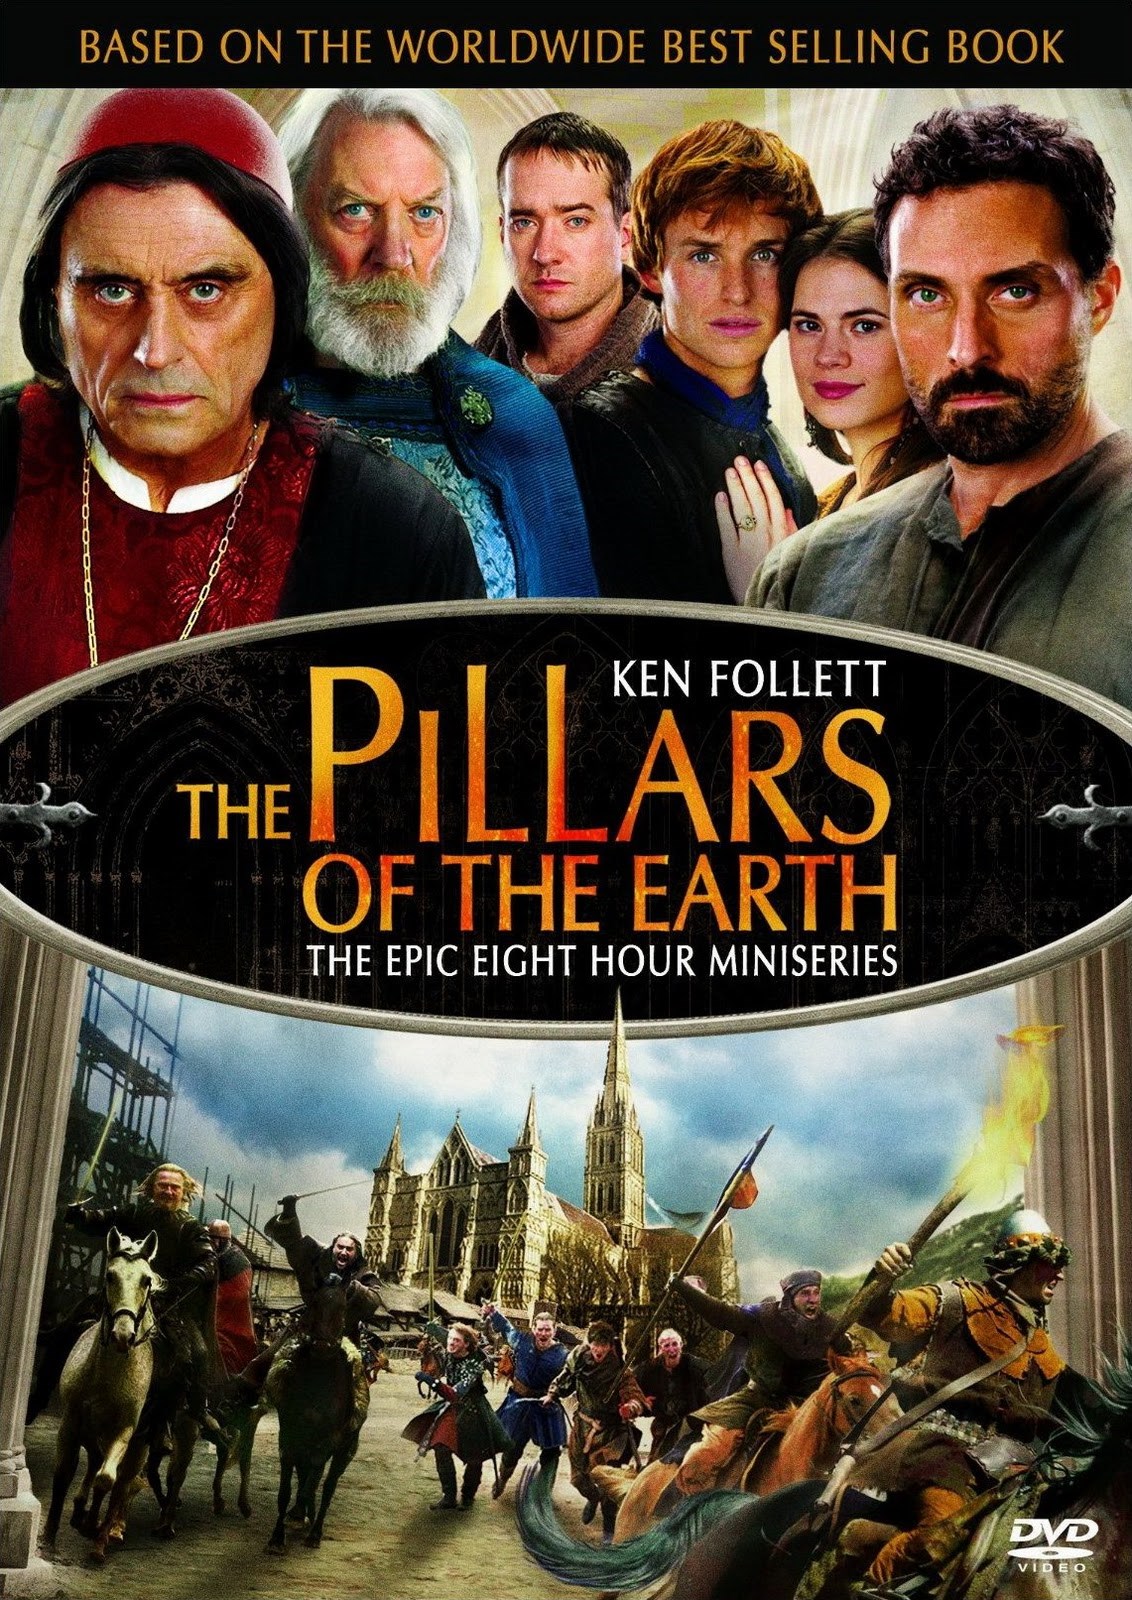 The Pillars Of The Earth season 1 download episodes of